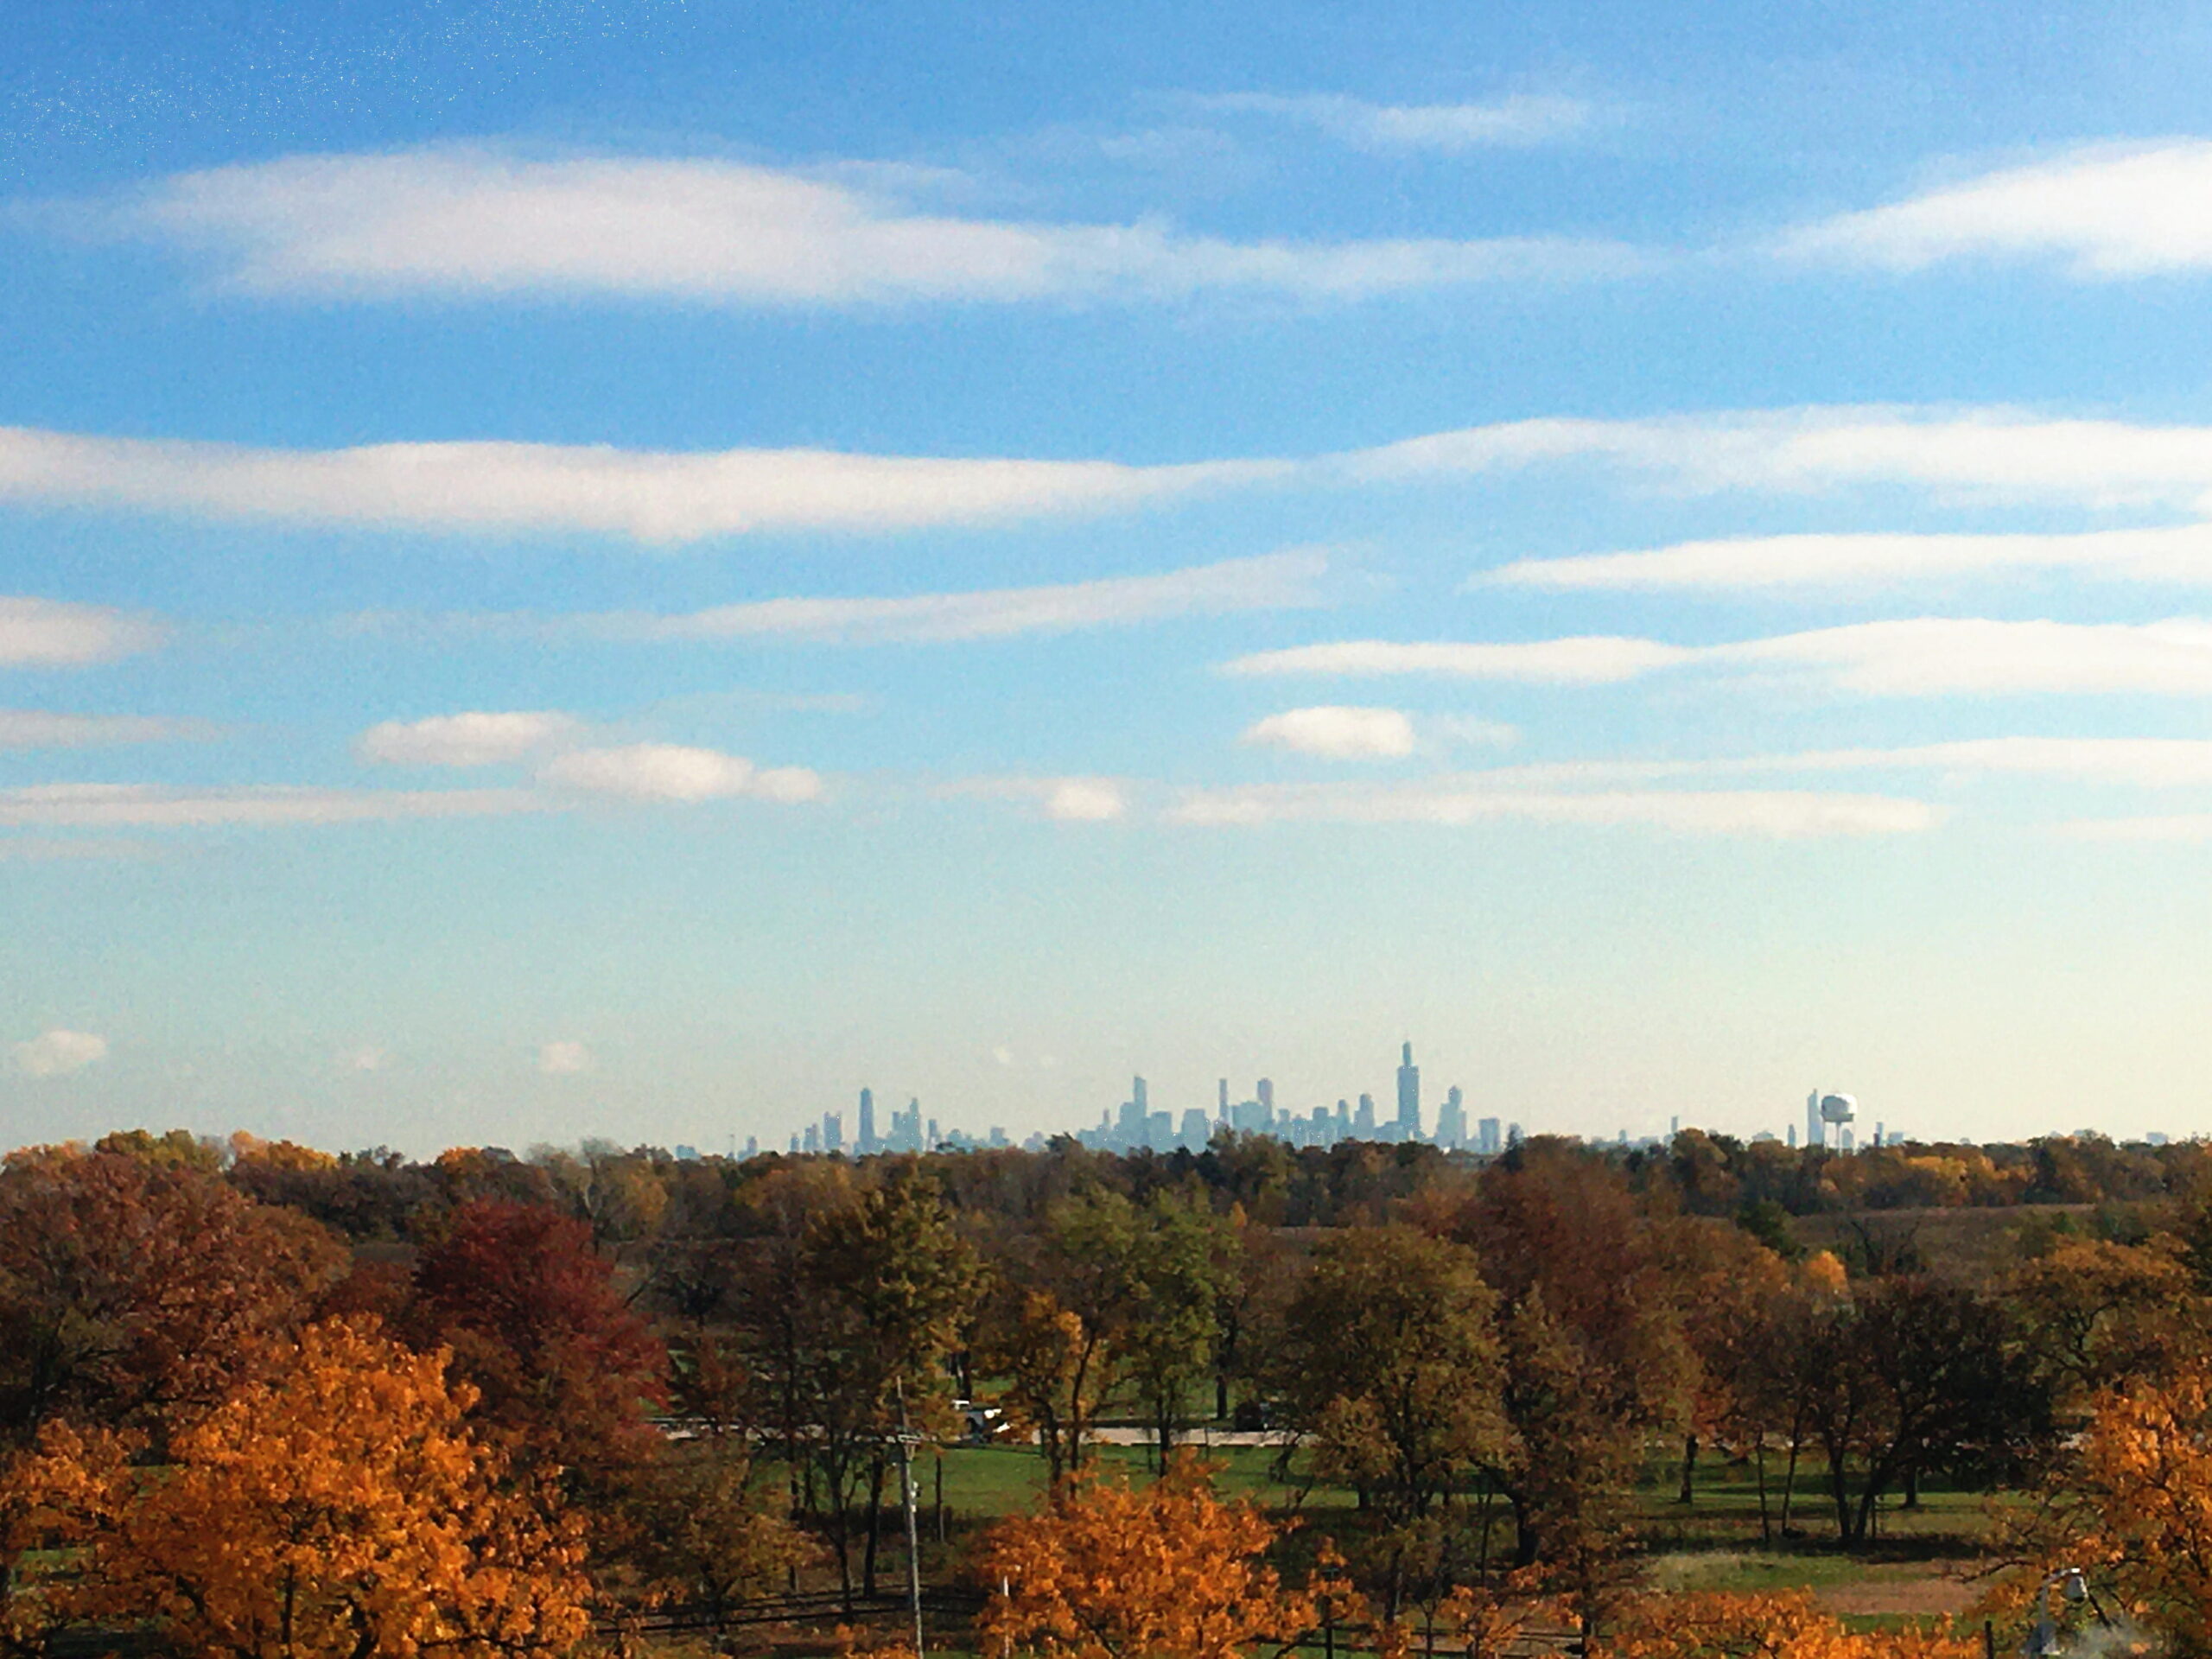 Image of Chicago across the prairie and forest.